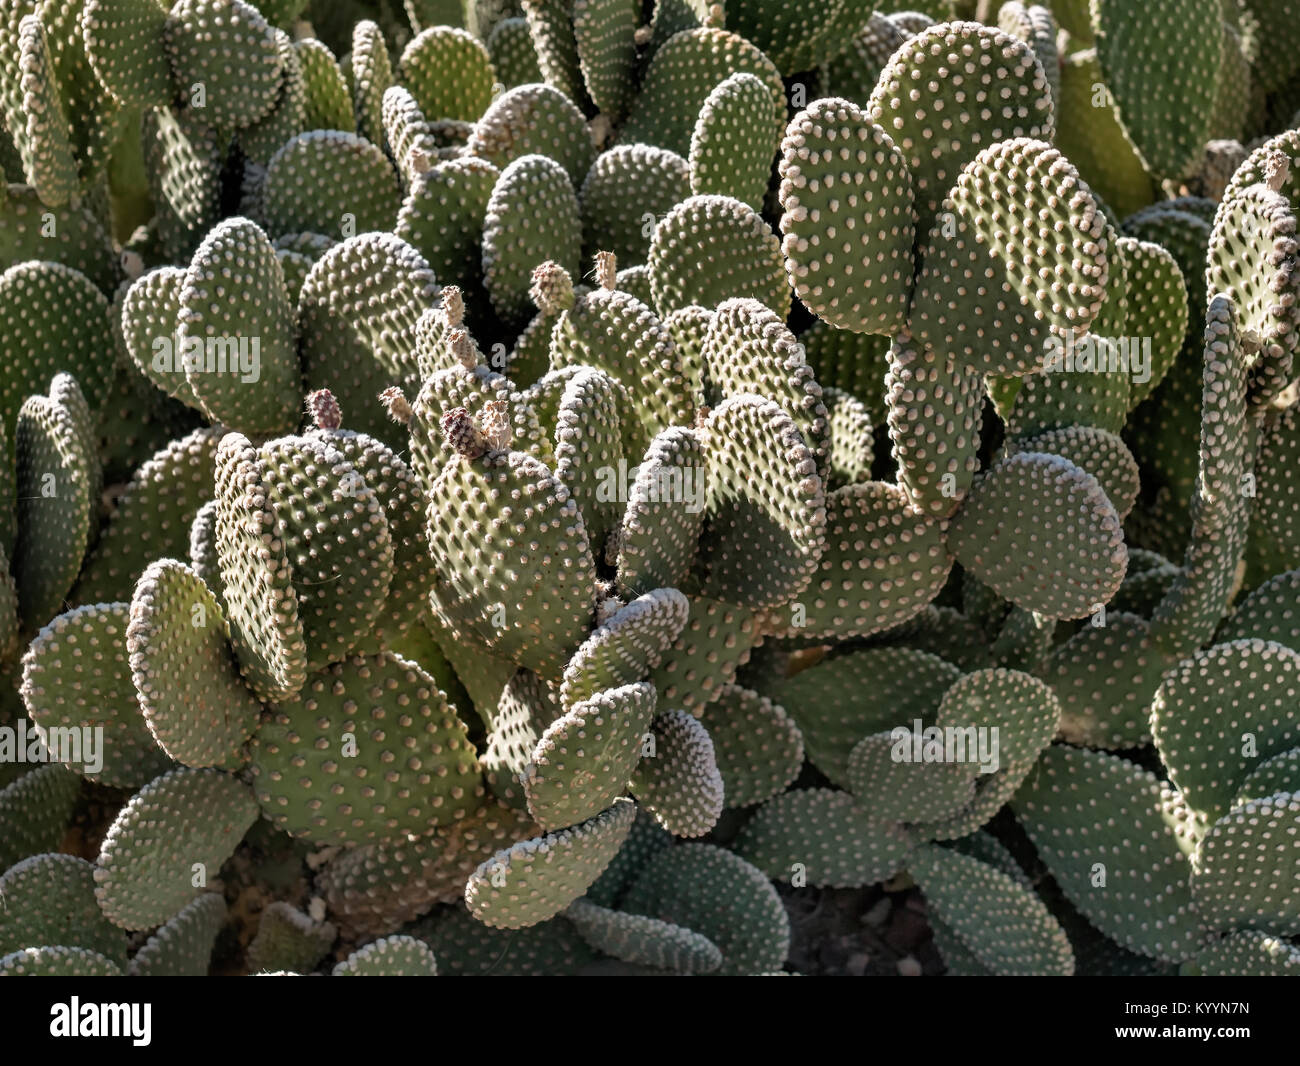 Opuntia cacti with buds and many spines Stock Photo